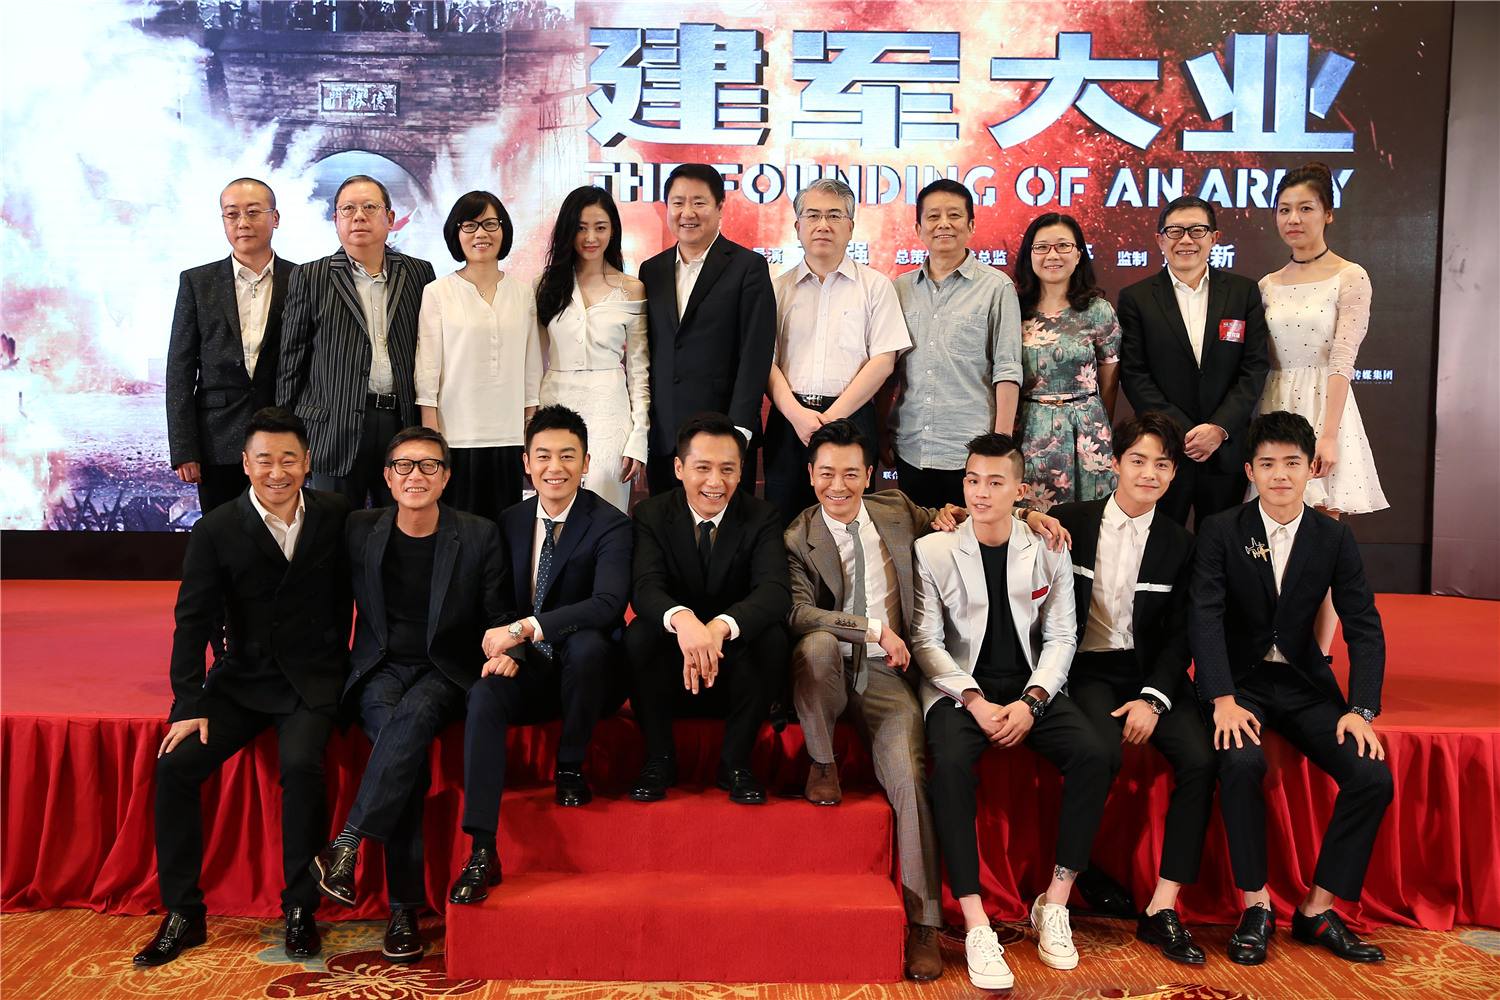  Special collected porcelain of “The prosperity of the world” unveiled in the Shanghai release conference of the movie “The Founding of An Army”